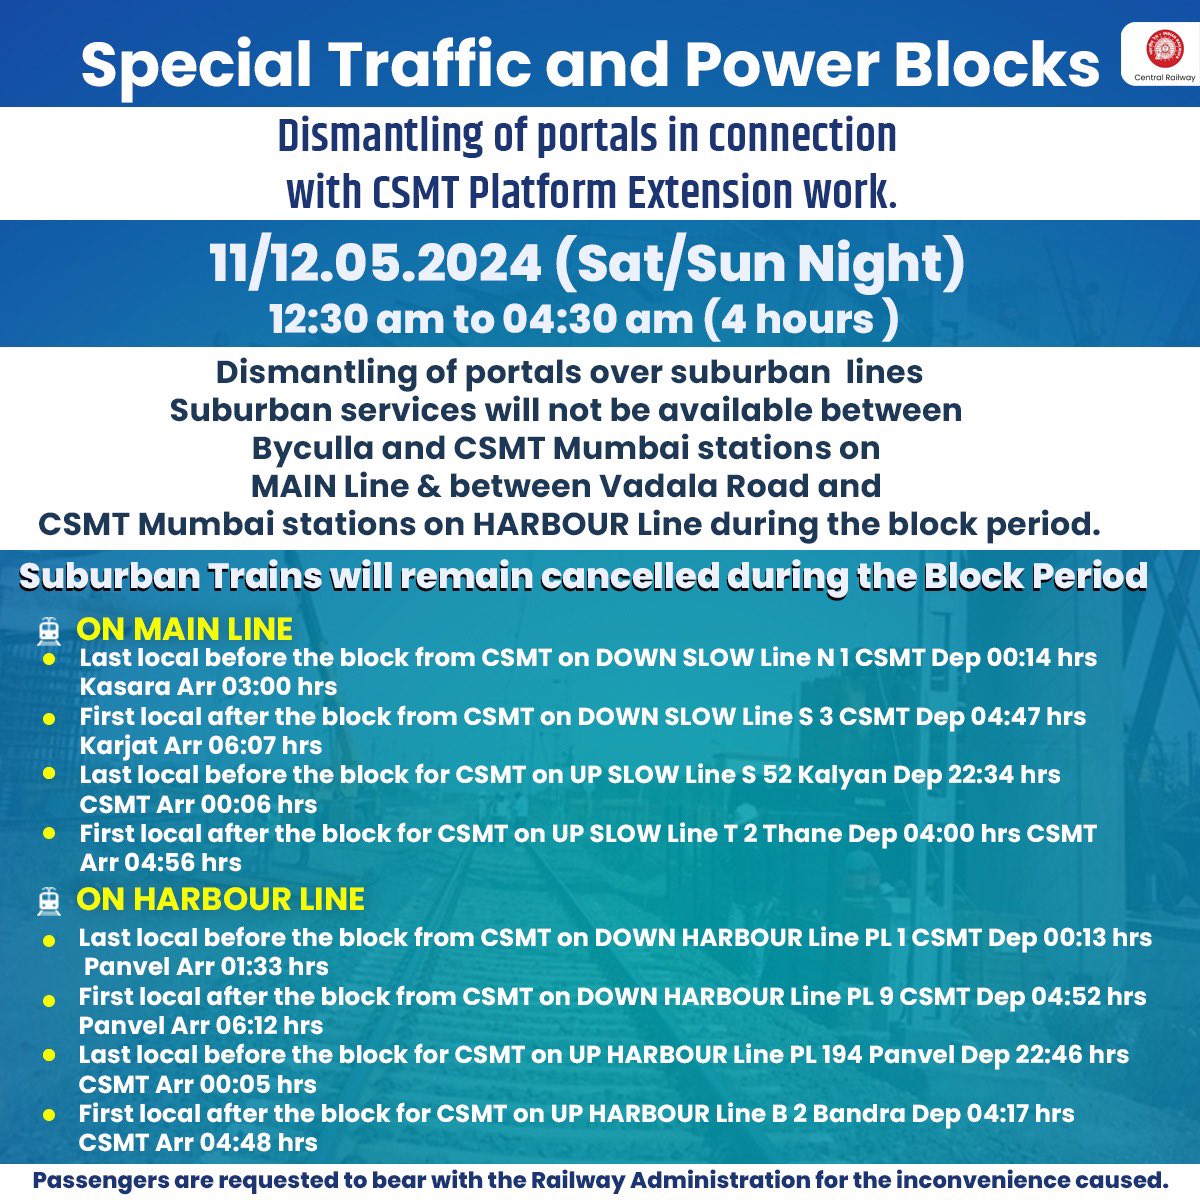 Traffic and Power Blocks for Dismantling of portals on 11/12.05.2024 (Saturday/ Sunday Night) The inconvenience caused is highly regretted, and passengers are requested to bear with the Railways. #CentralRailway #Powerblock #Trafficblock